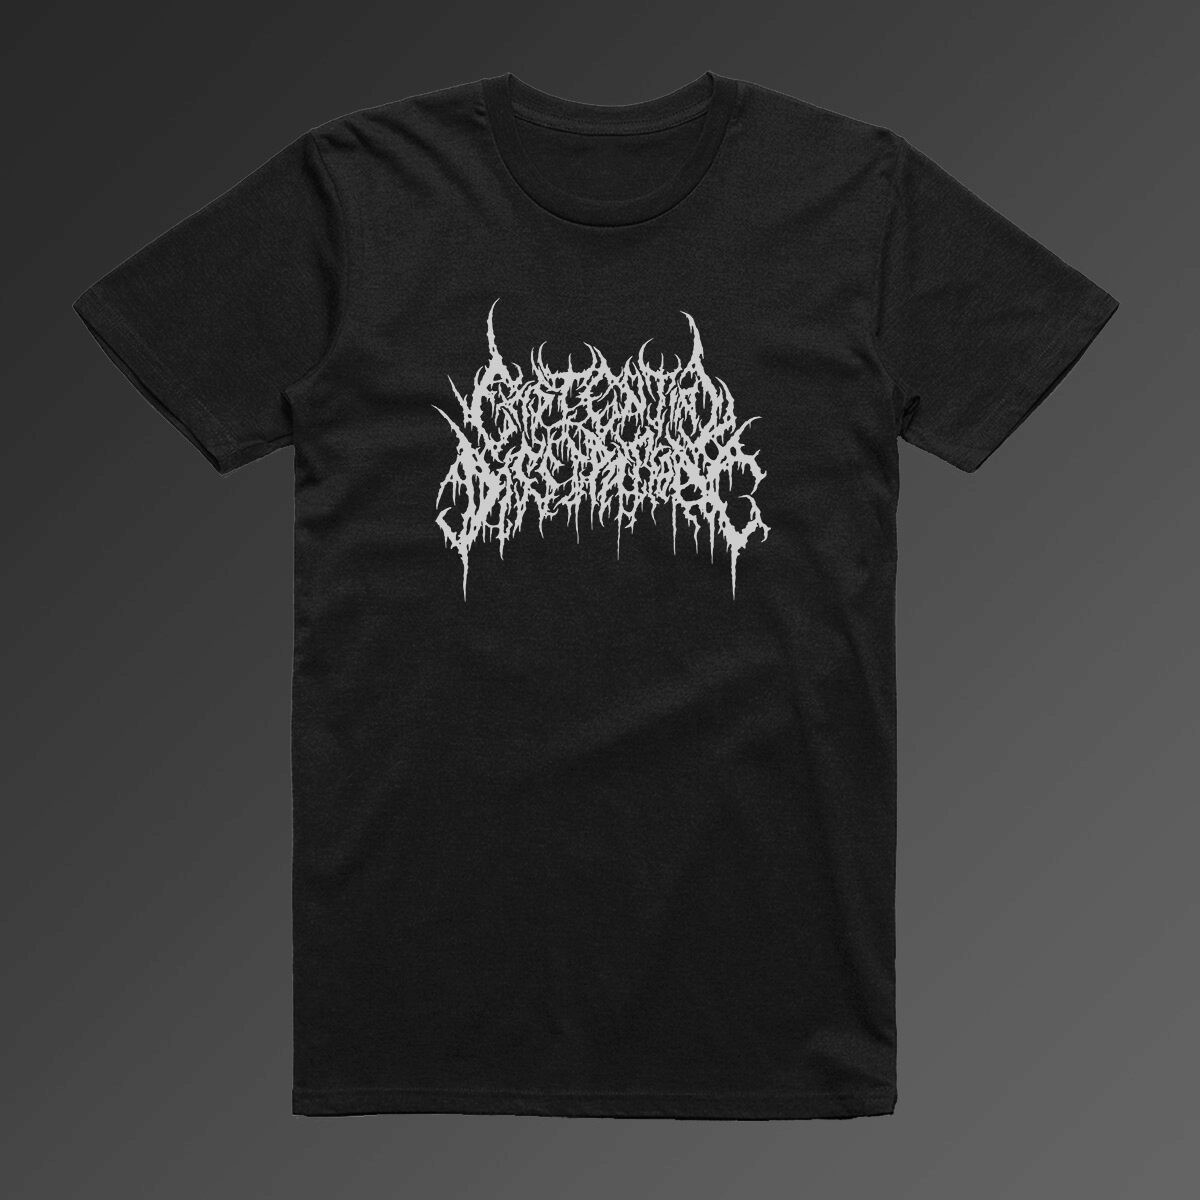 A mockup of the Existential Dissipation logo tee